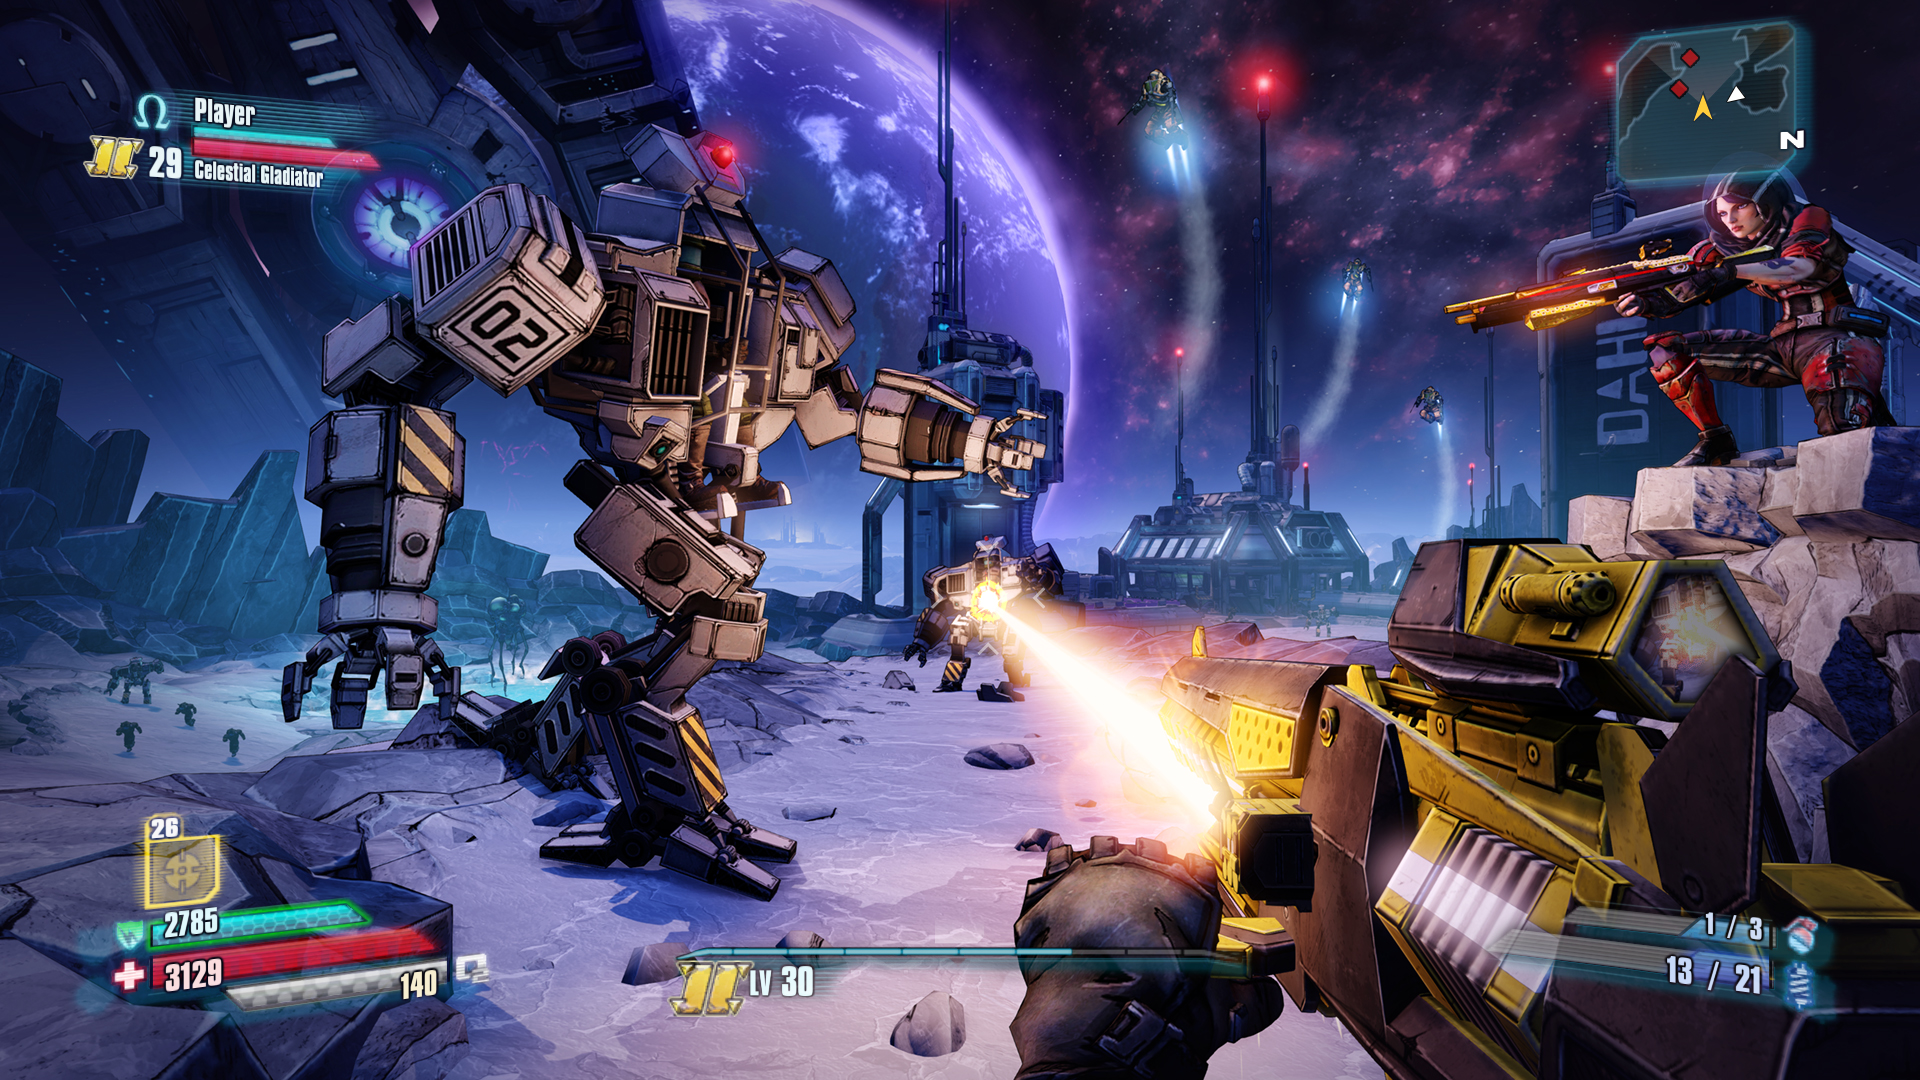 pond kruipen emmer The new Borderlands game isn't coming to Xbox One or PlayStation 4 -  GameSpot